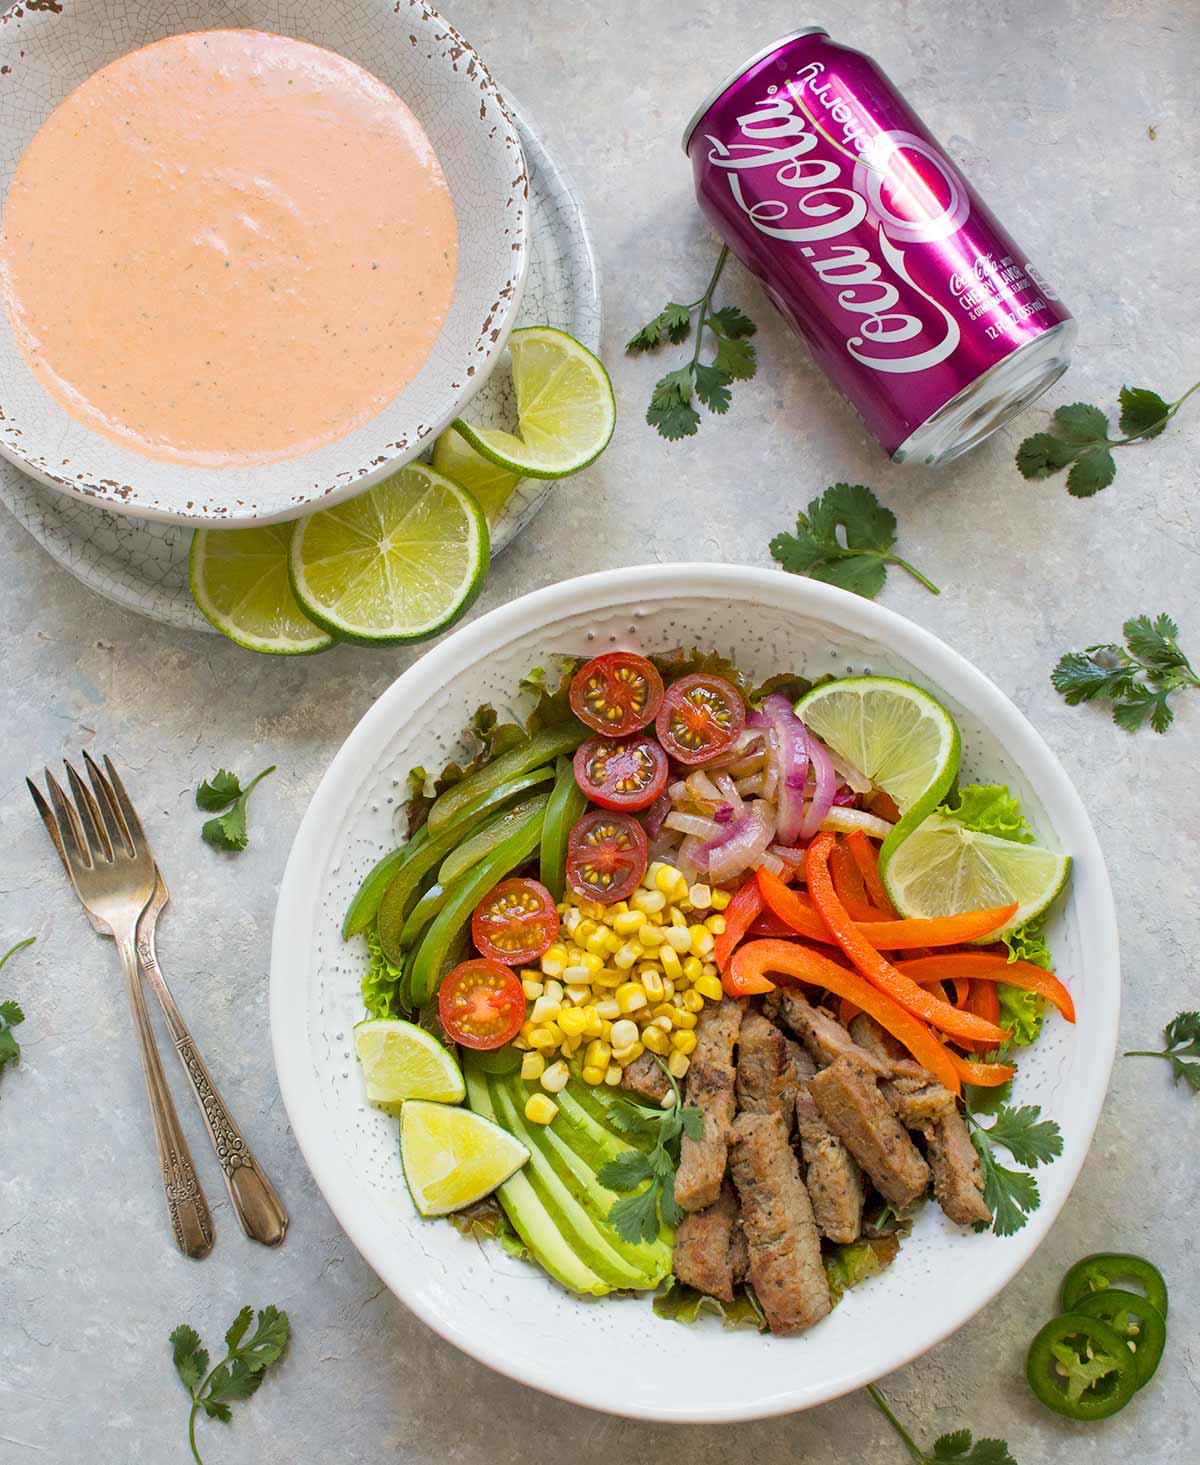 Beef Fajita Salad with Creamy Salsa Dressing, served in a bowl, with a can of Cherry Coke